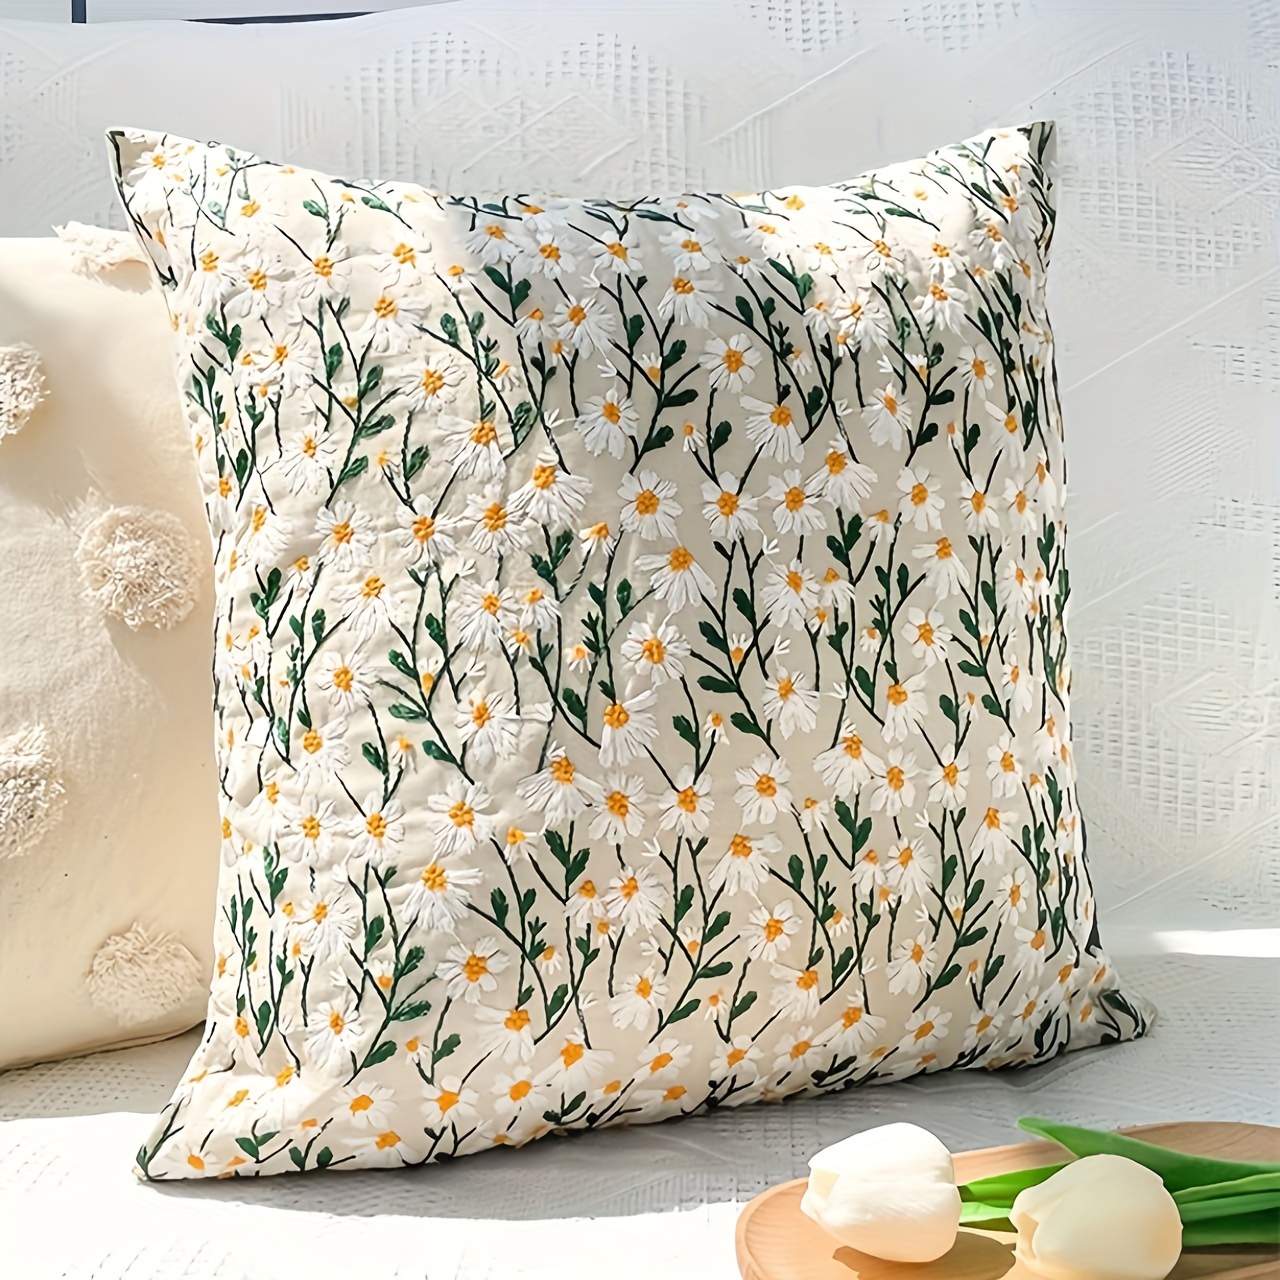 

1pc Daisy Embroidered Cushion Cover Without Filler, Modern Canvas Decorative Throw Pillow Cover For Home Bedroom Decor, Living Room Decor, Multiple Colorsavailable, No Pillow Insert